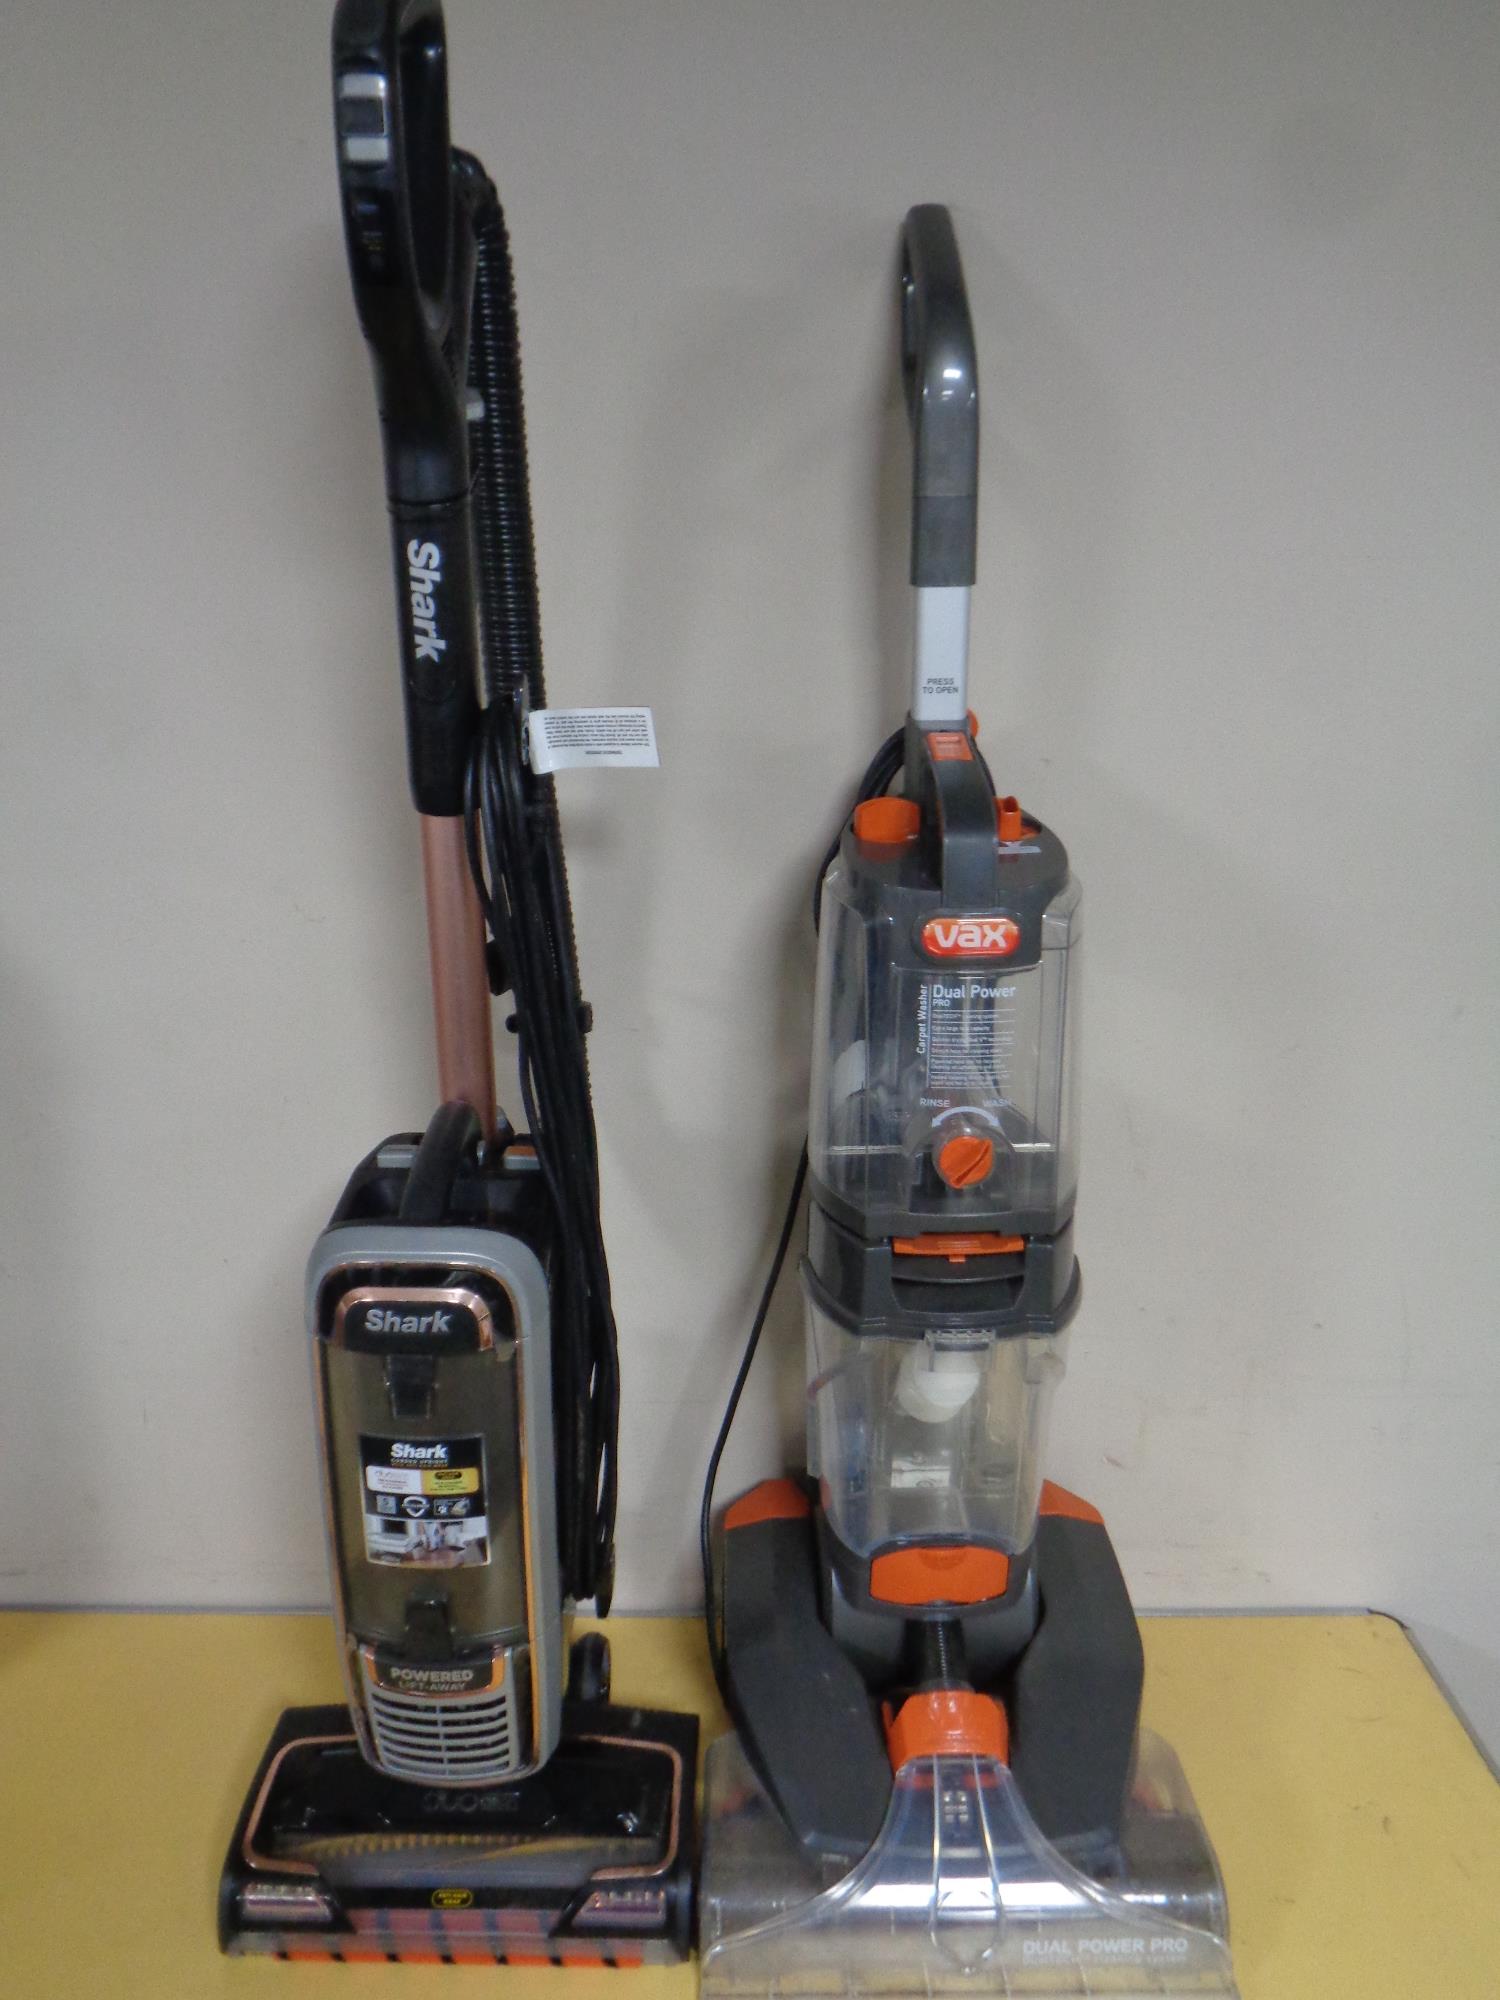 A Vax carpet washer and a Shark corded upright vacuum cleaner